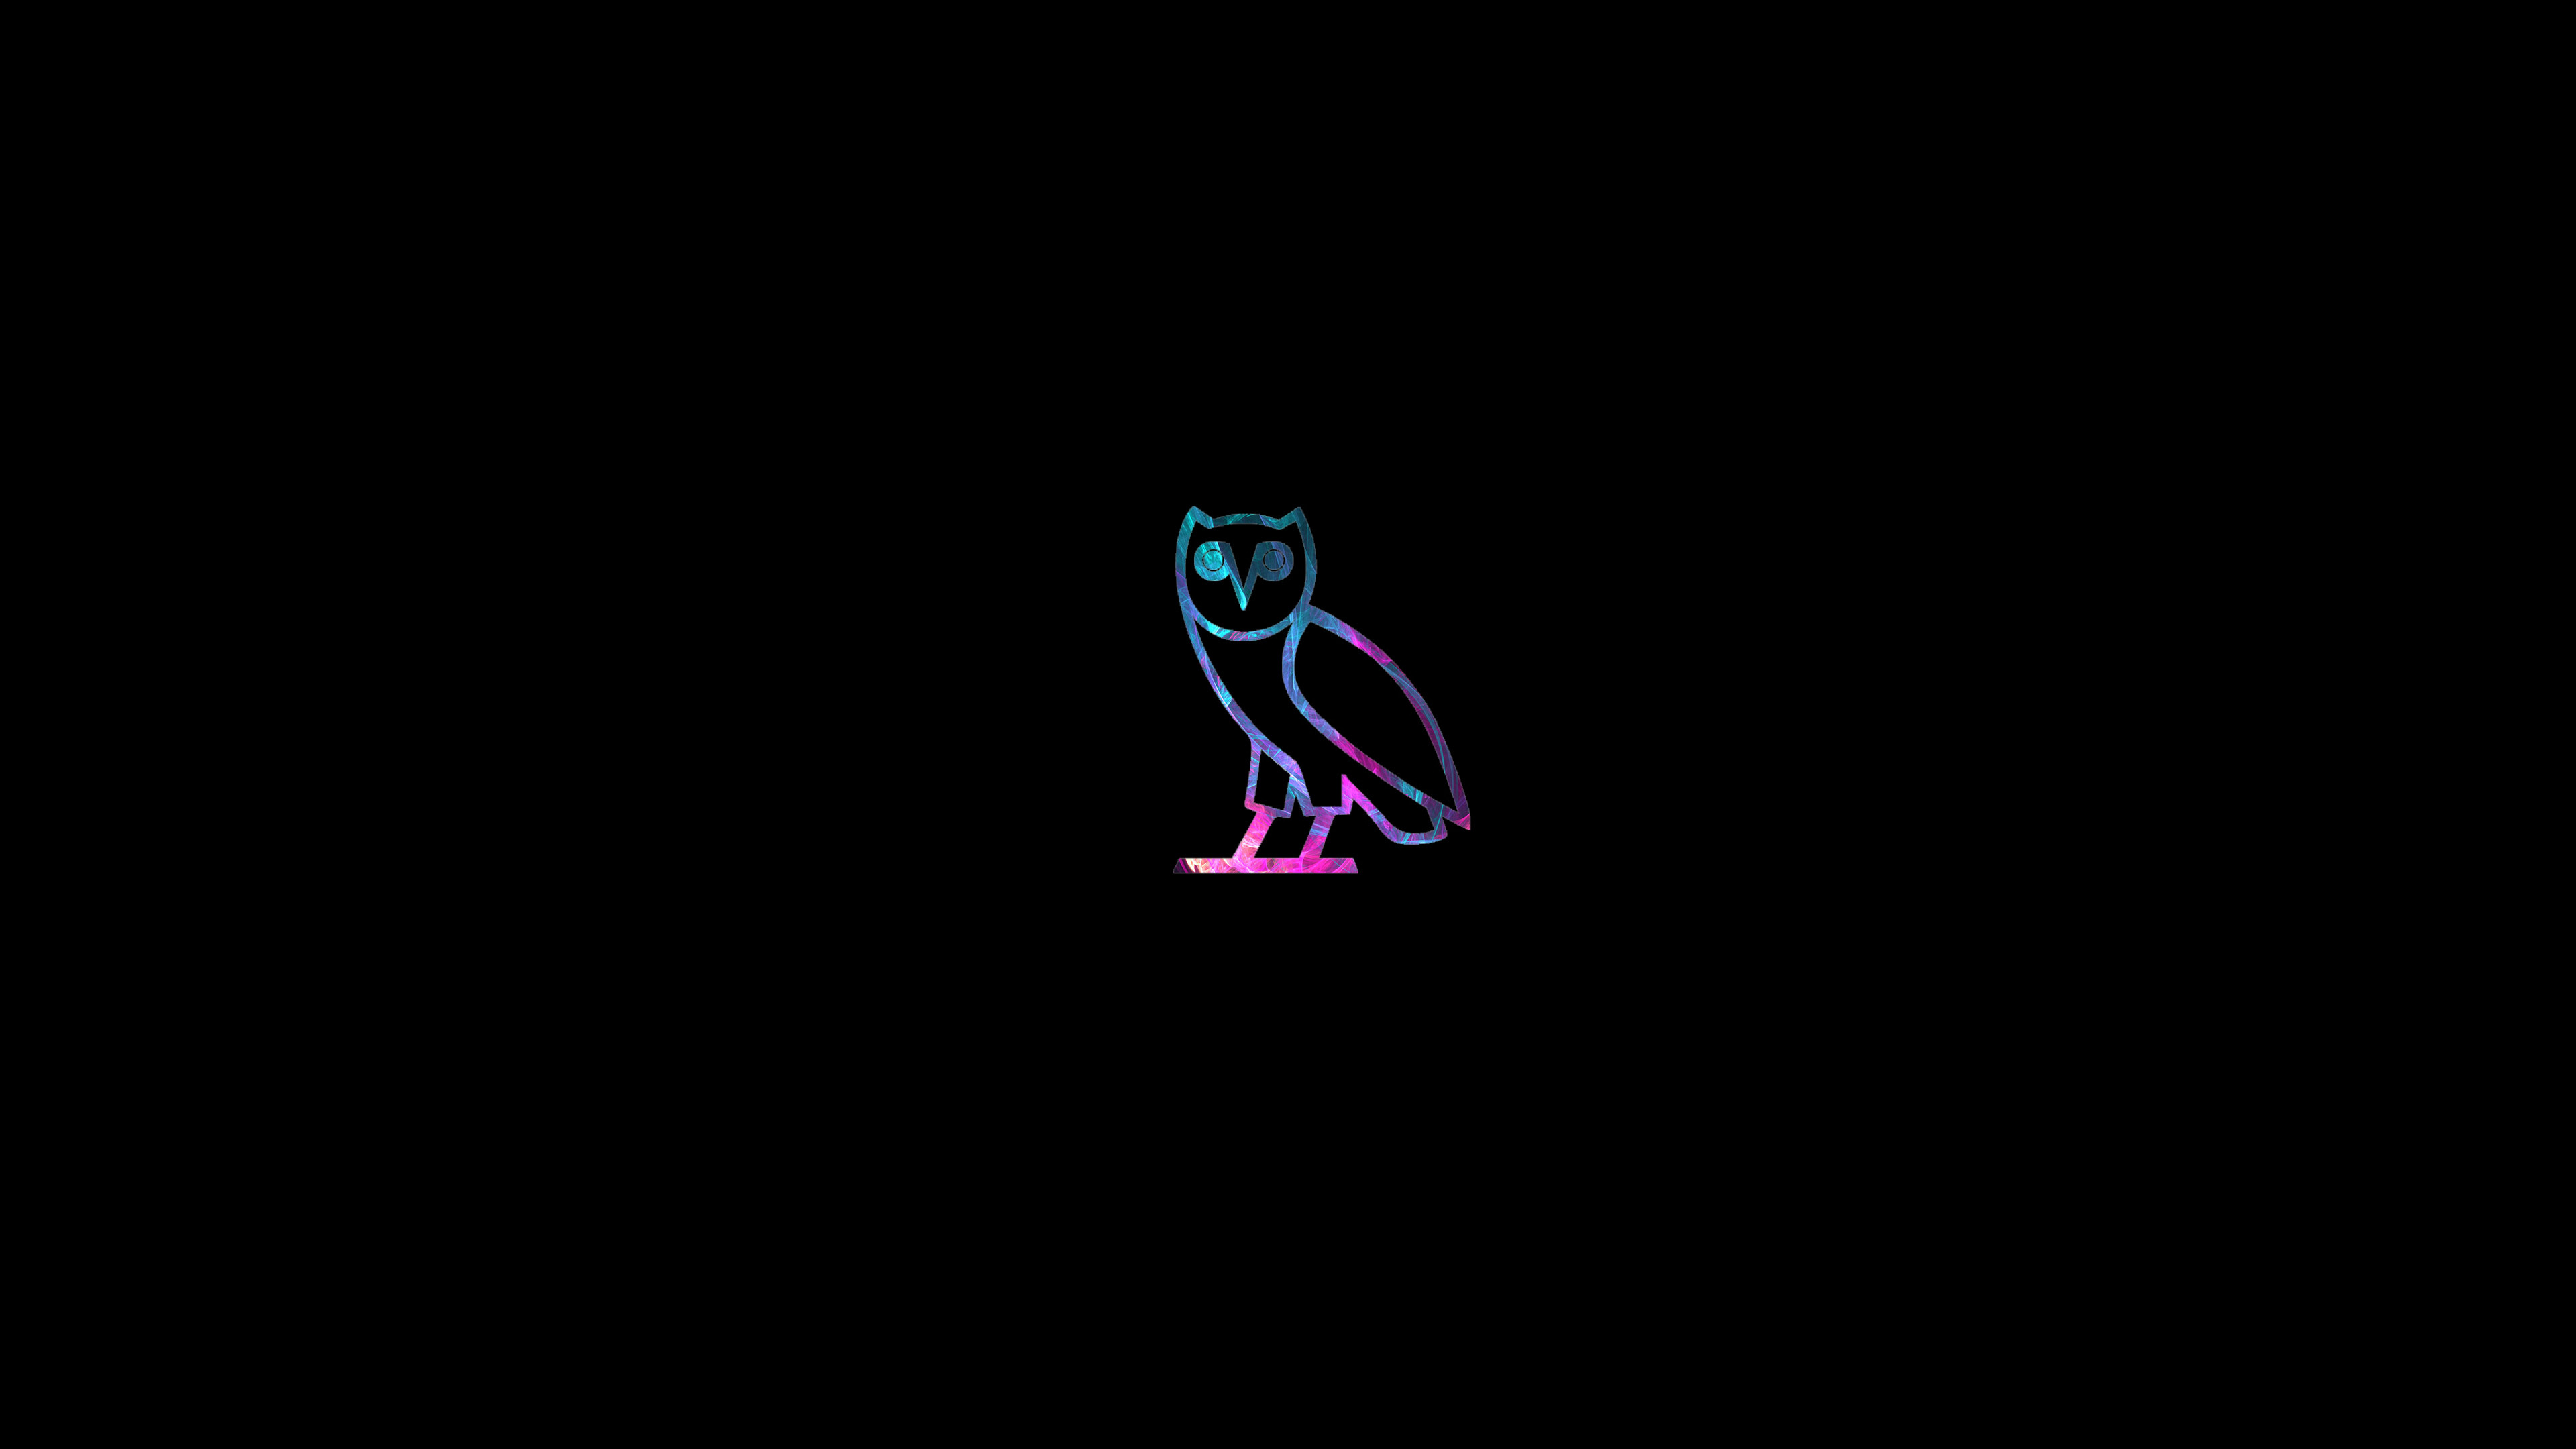 3840x2160 <b>Ovo Wallpapers</b> HD, Desktop Backgrounds, Images and